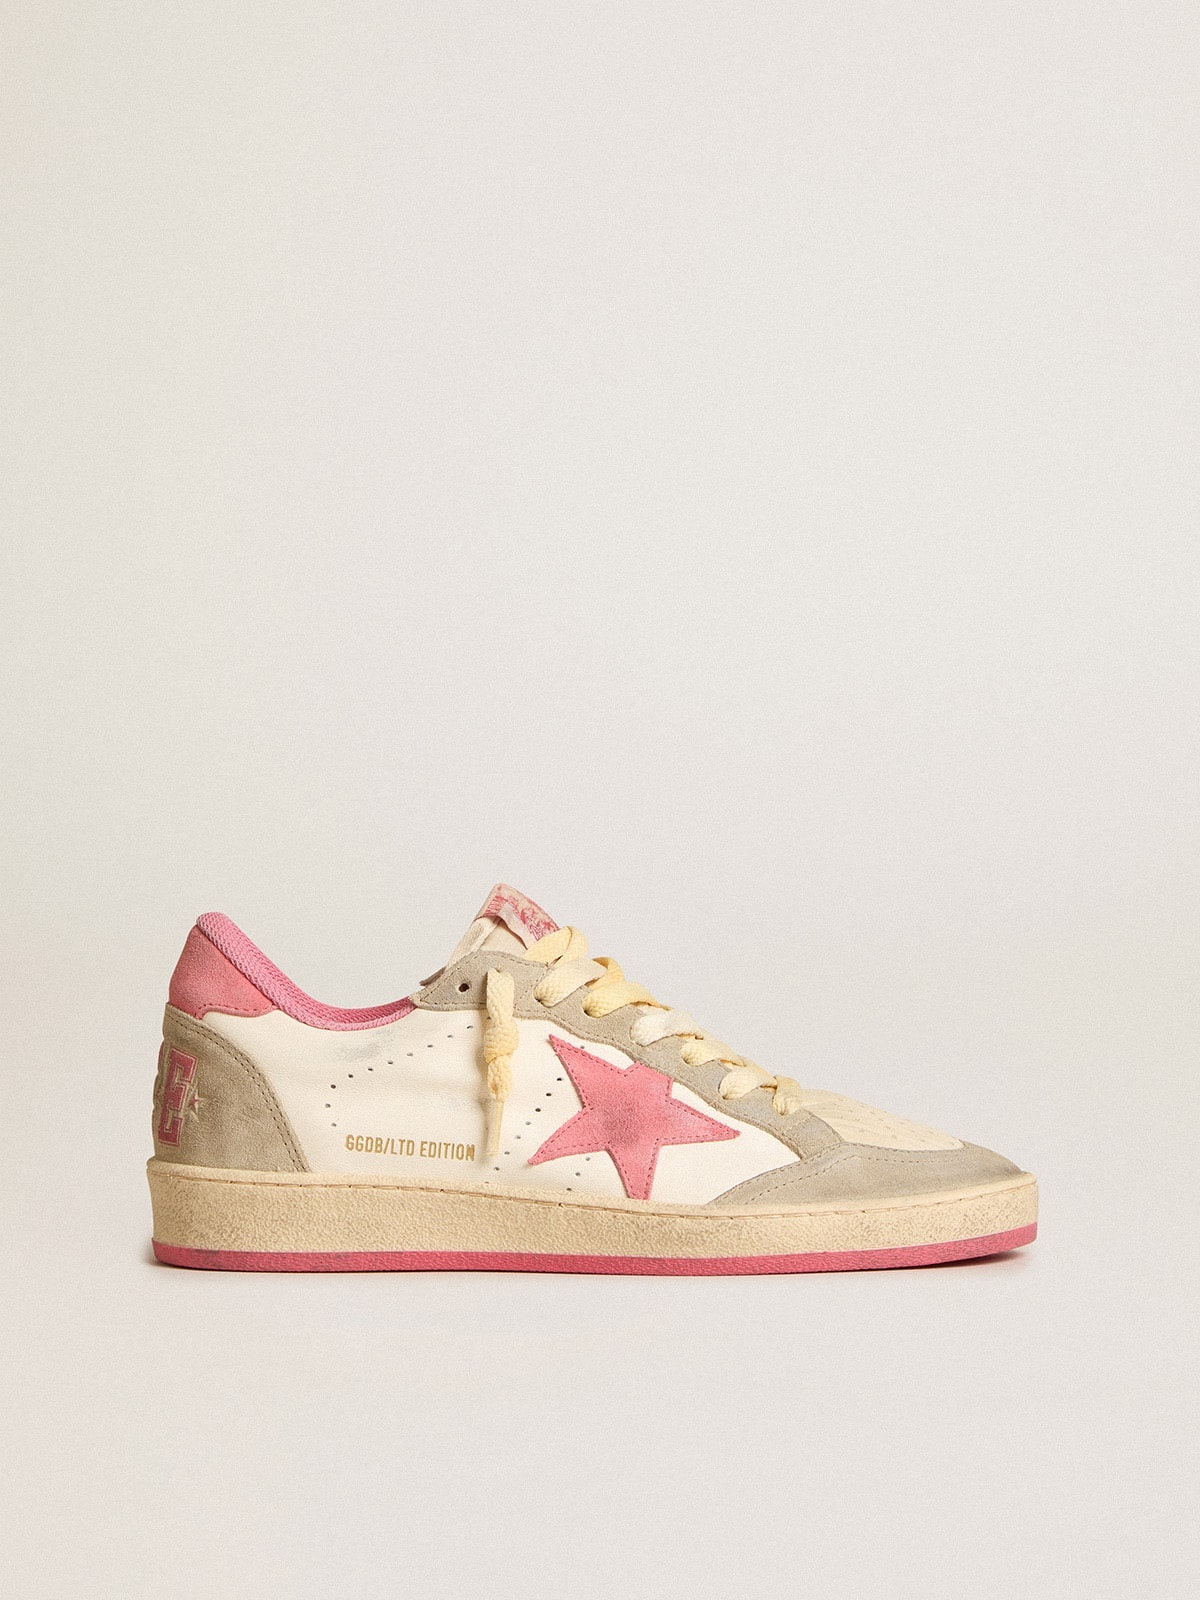 Ball Star LTD in nappa with pink suede star and dove-gray inserts - 1